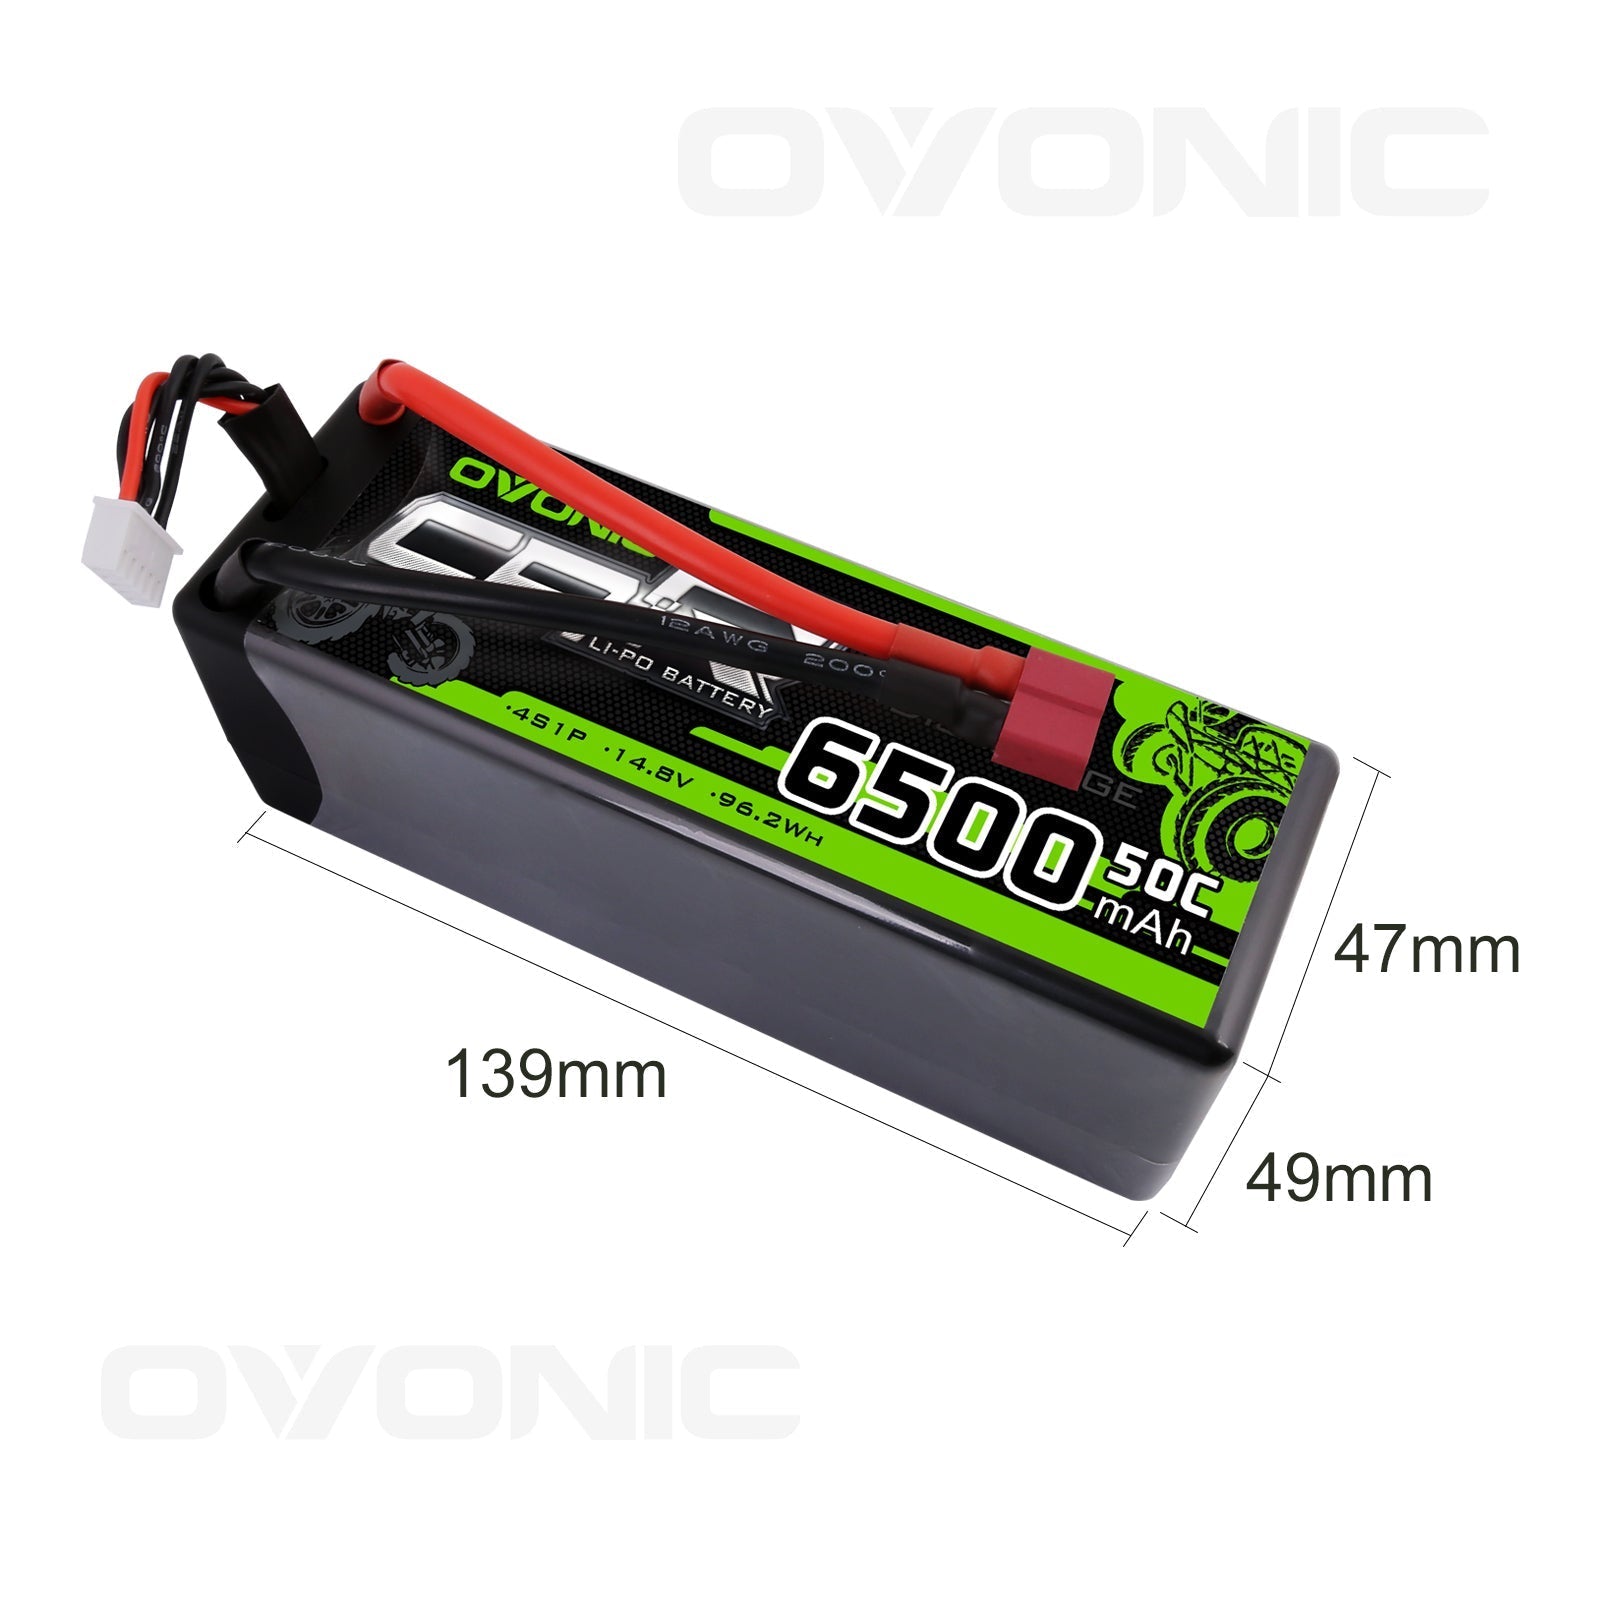 2×Ovonic 50C 2S 5200mAh LiPo Battery 7.4V Hardcase Deans Plug for RC – Ampow